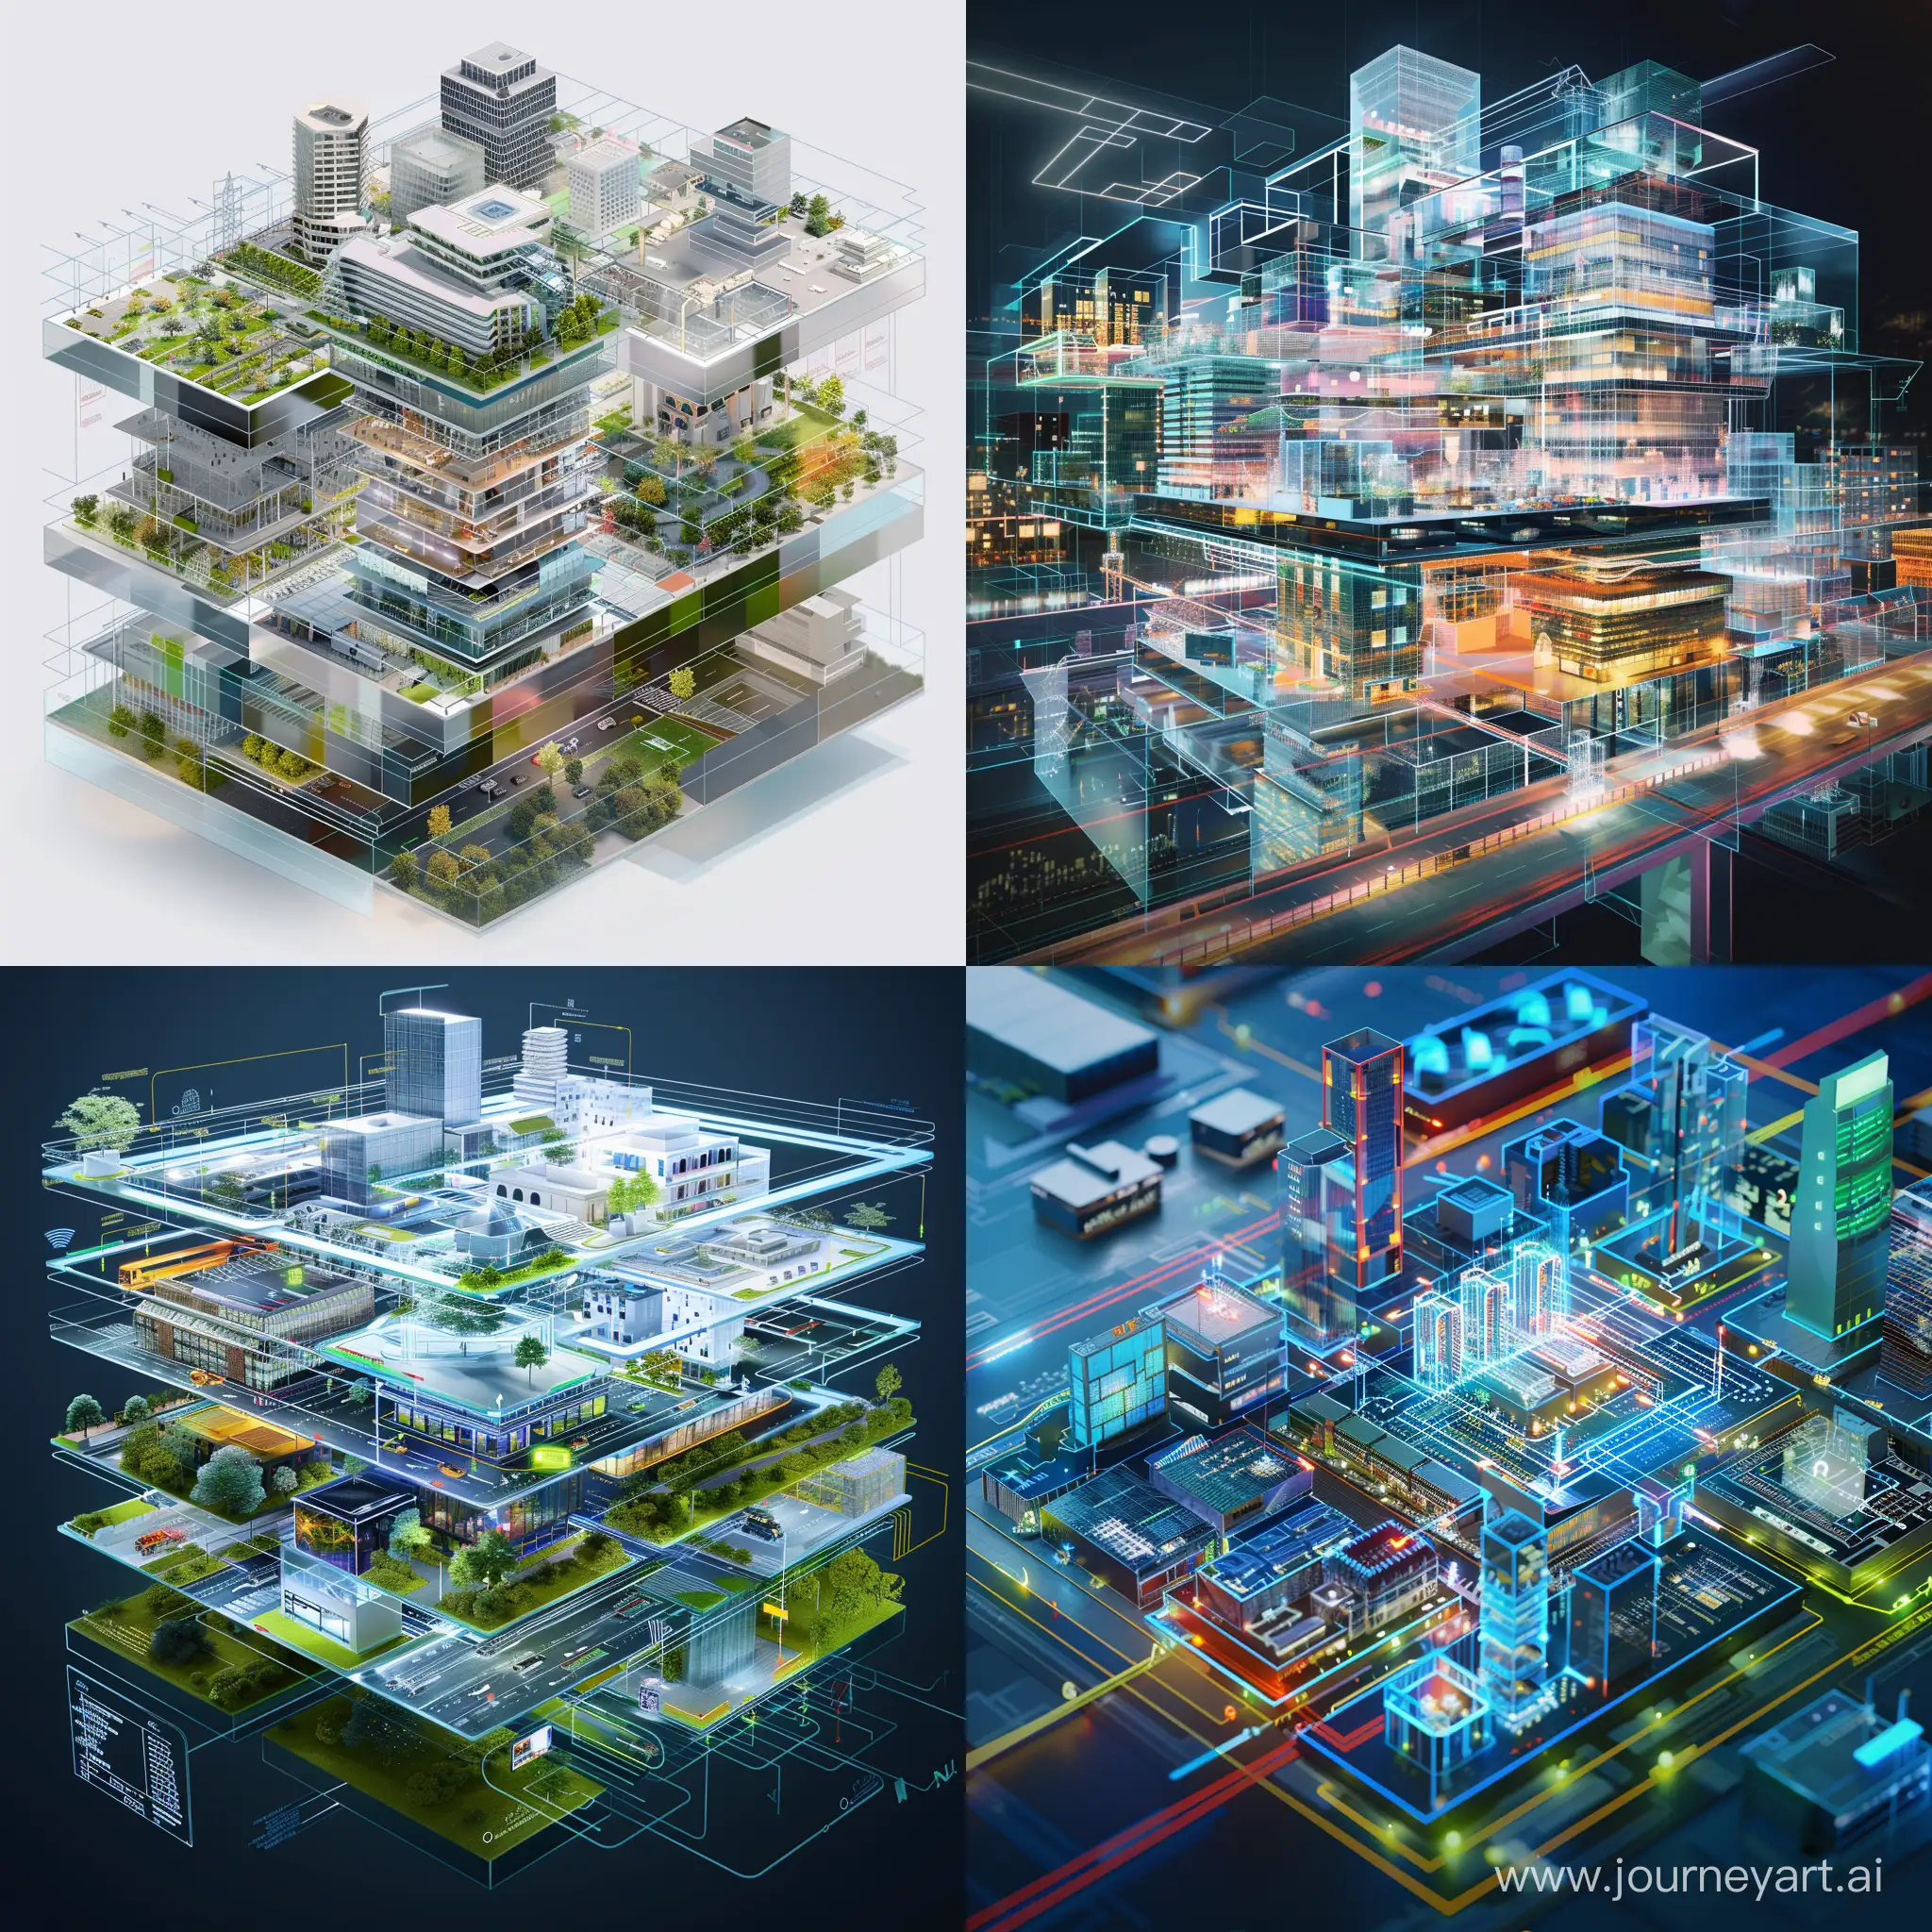 The digital twin of a modern city with several layers like buildings, infrastructure, transport, communications etc.